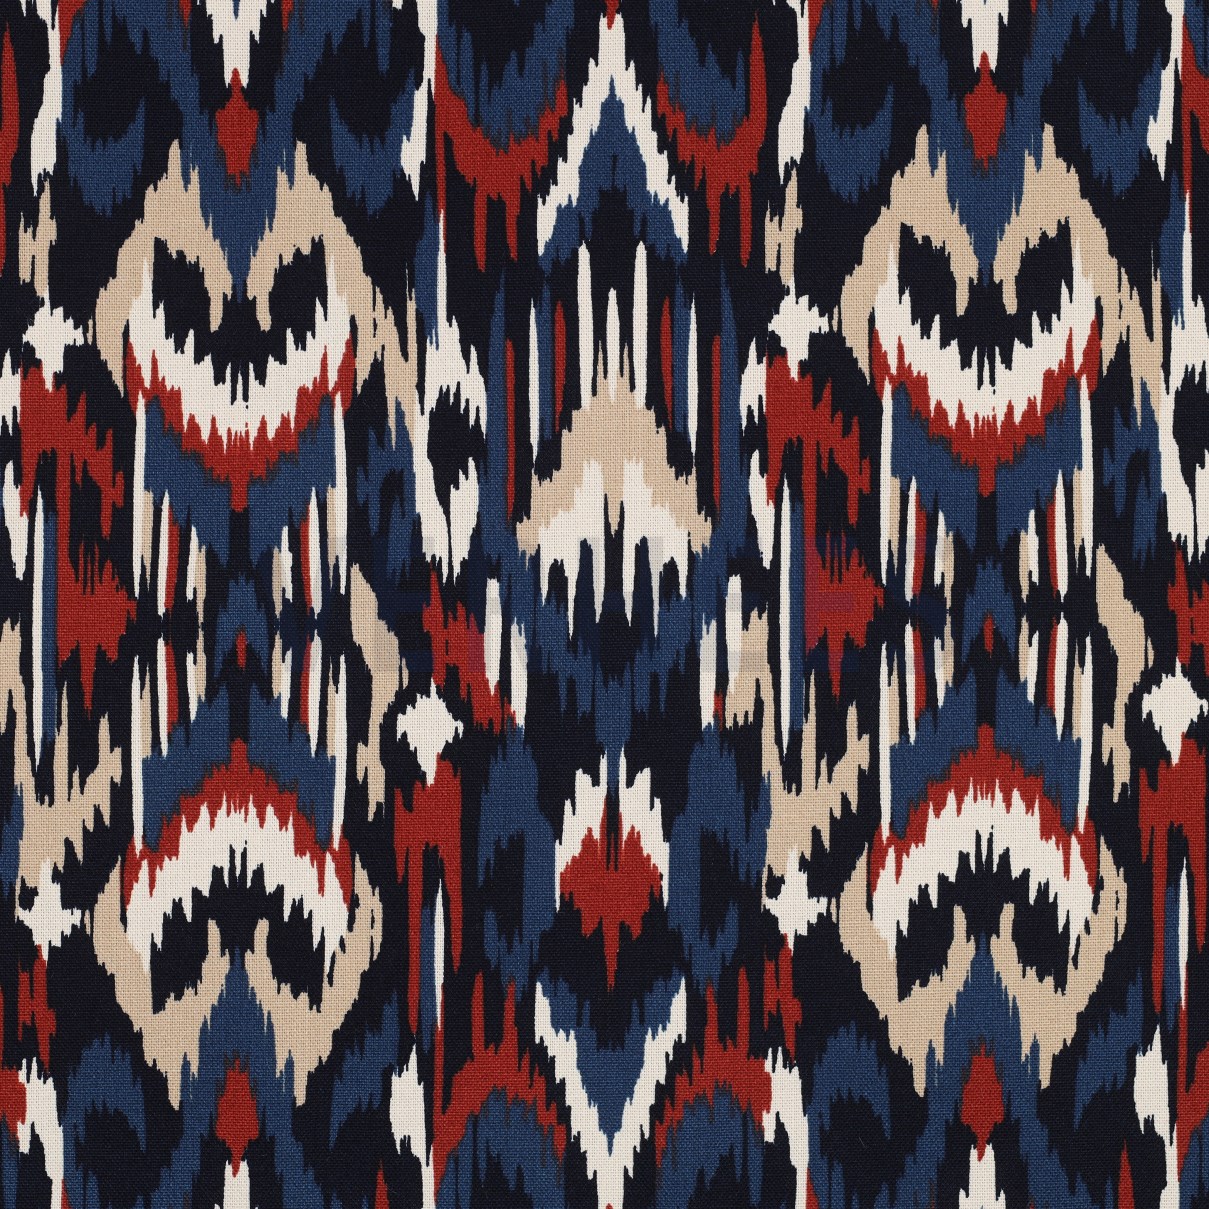 CANVAS ABSTRACT NAVY (high resolution)